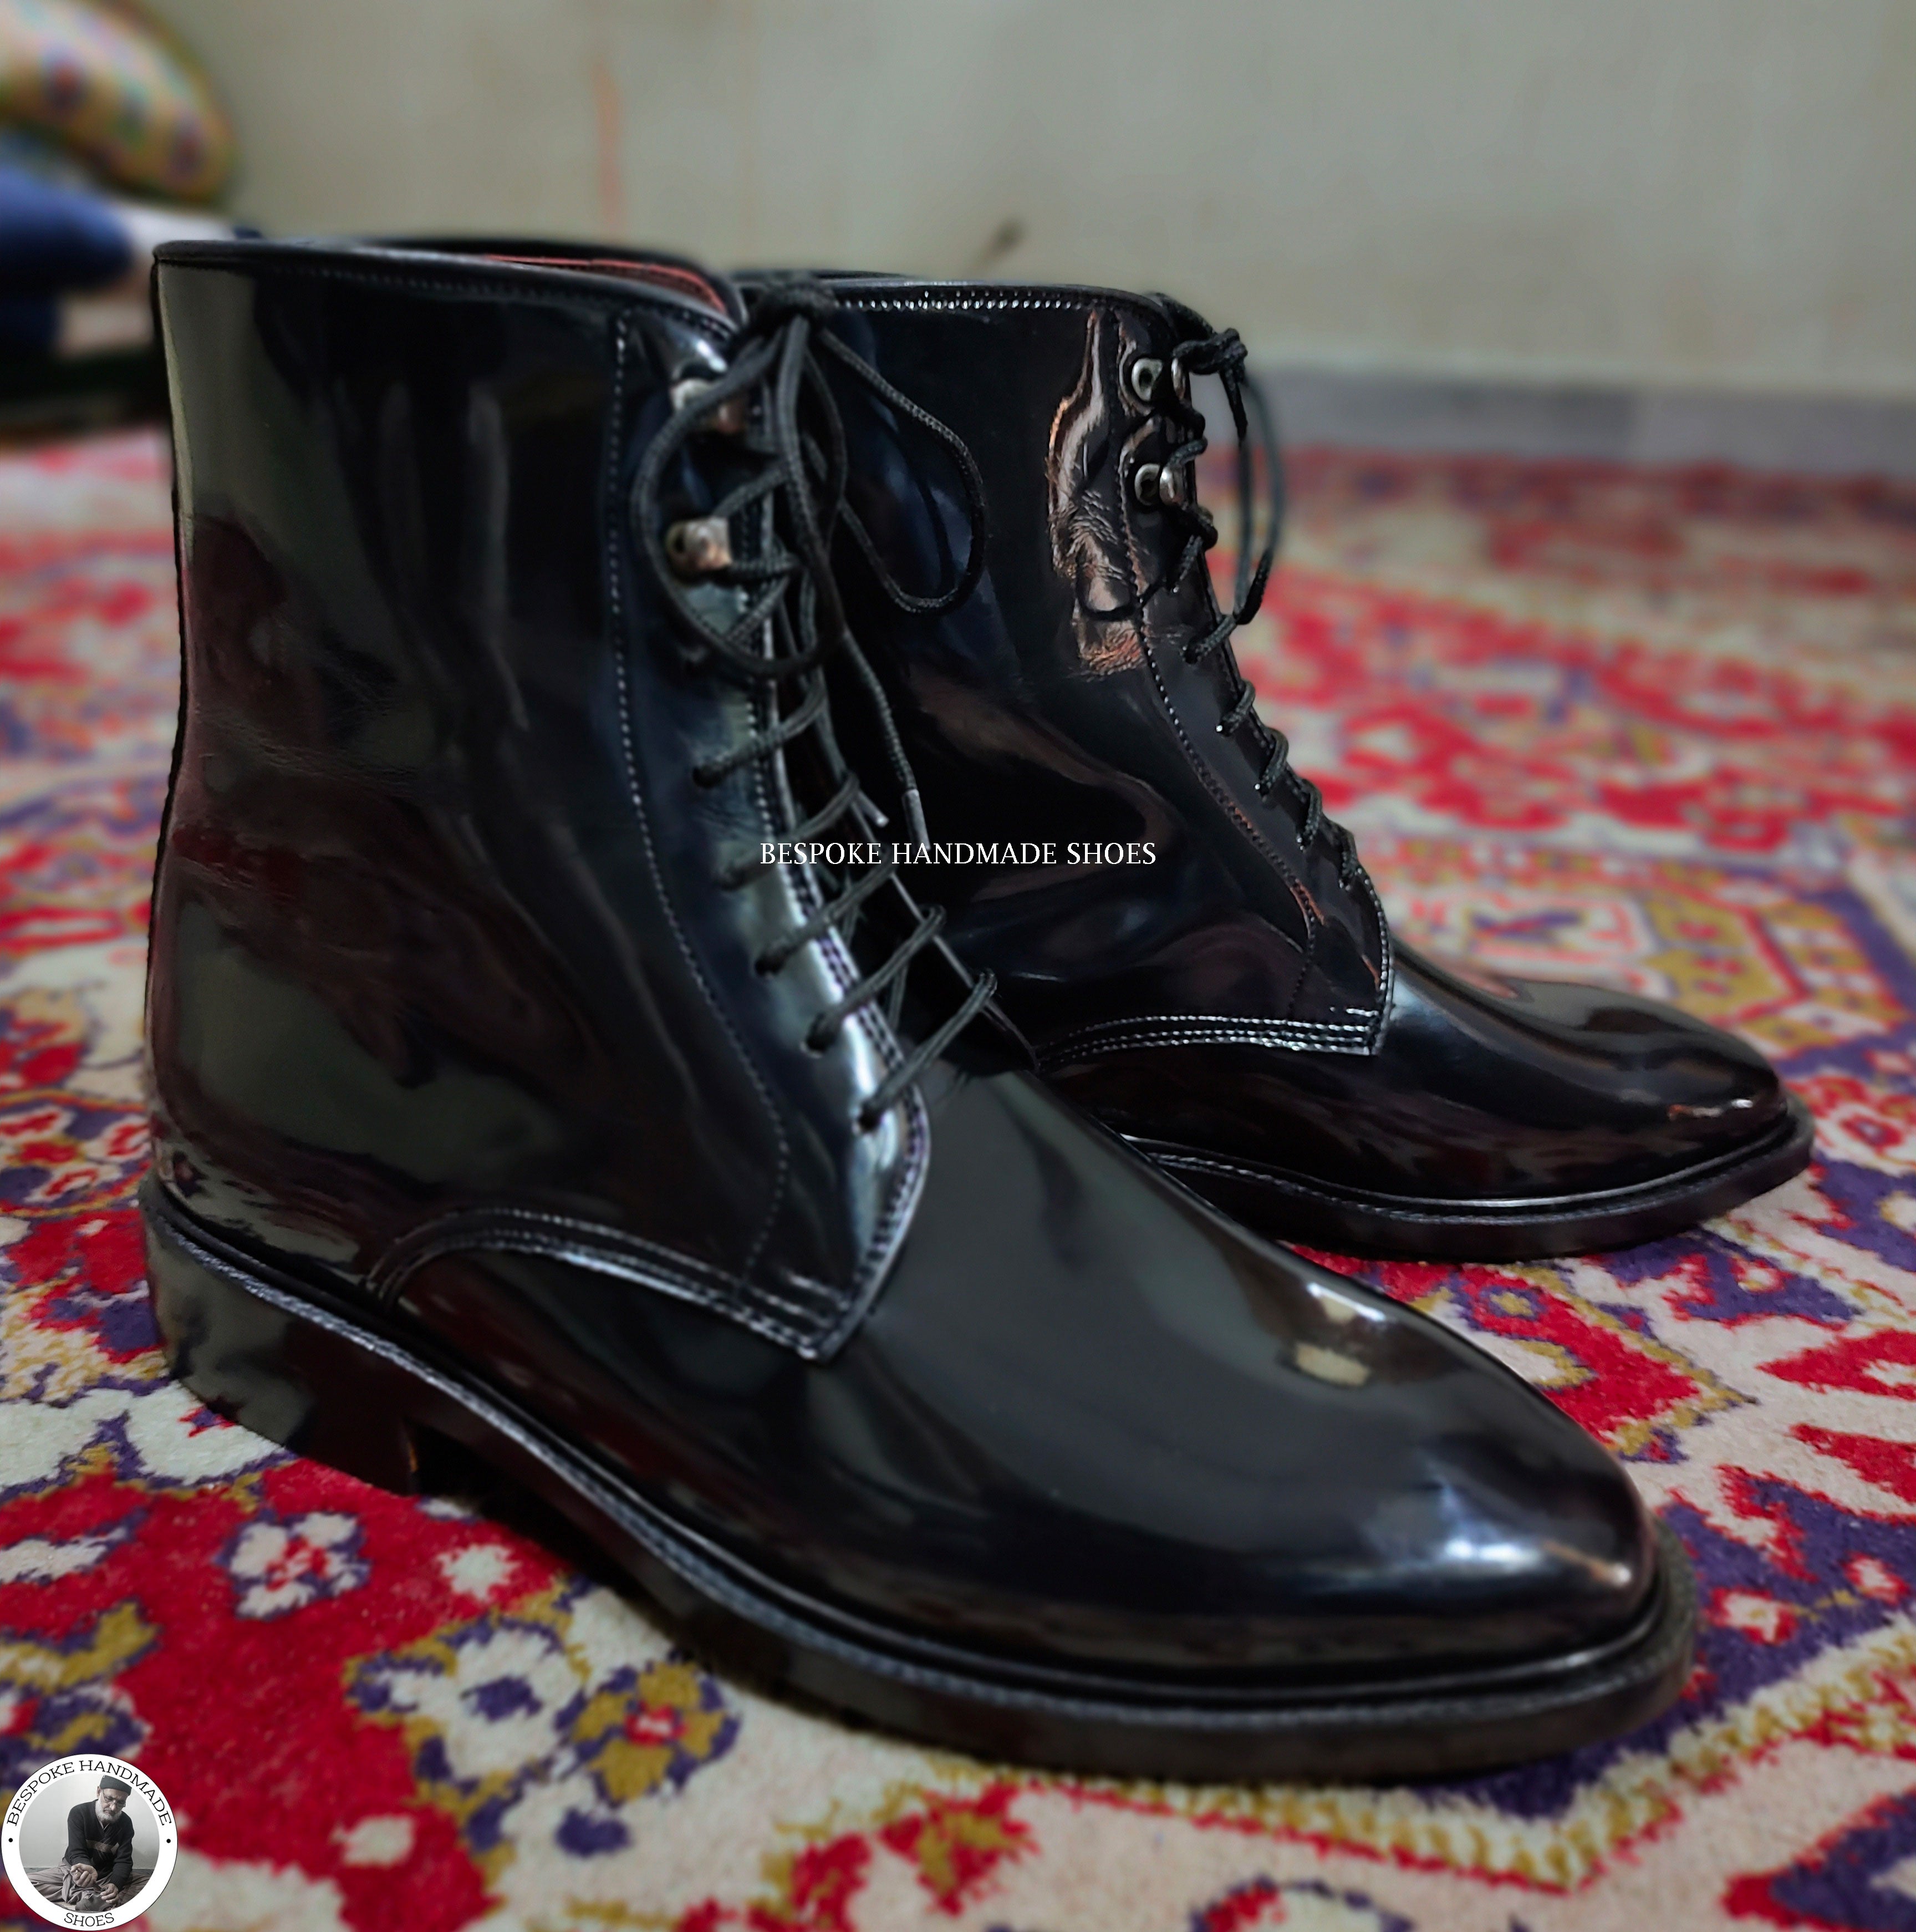 Black Patent Leather High Quality Boot